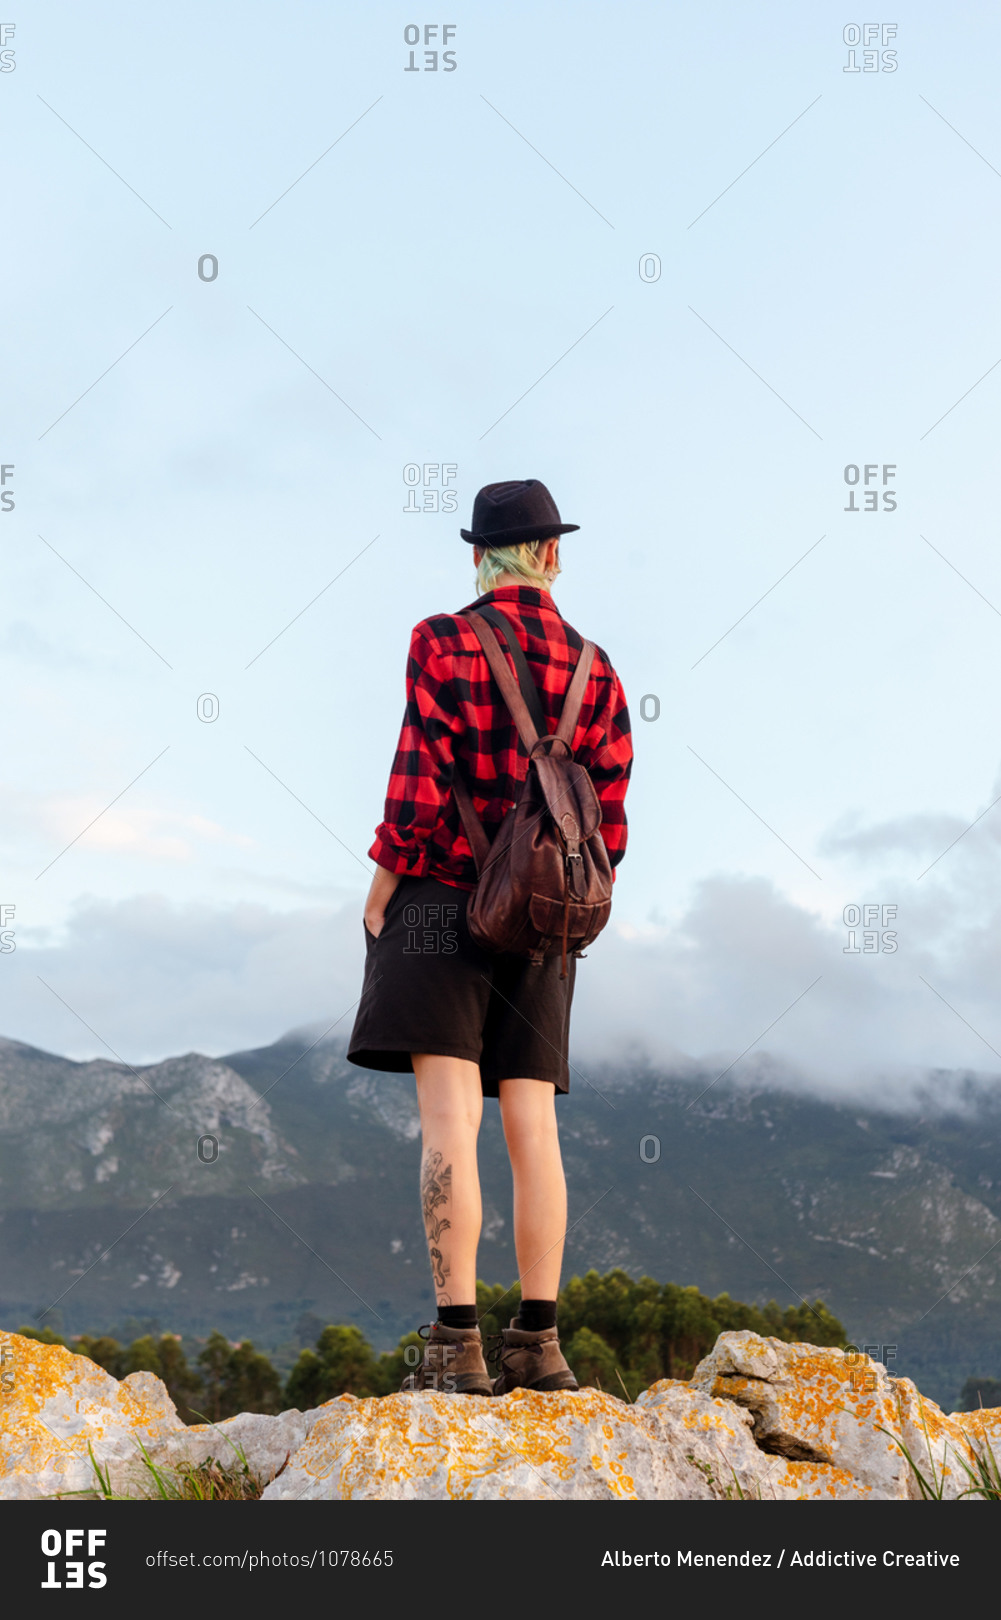 Back view low angle of carefree explorer standing on rocky hill in highlands and enjoying freedom with outstretched arms during adventure